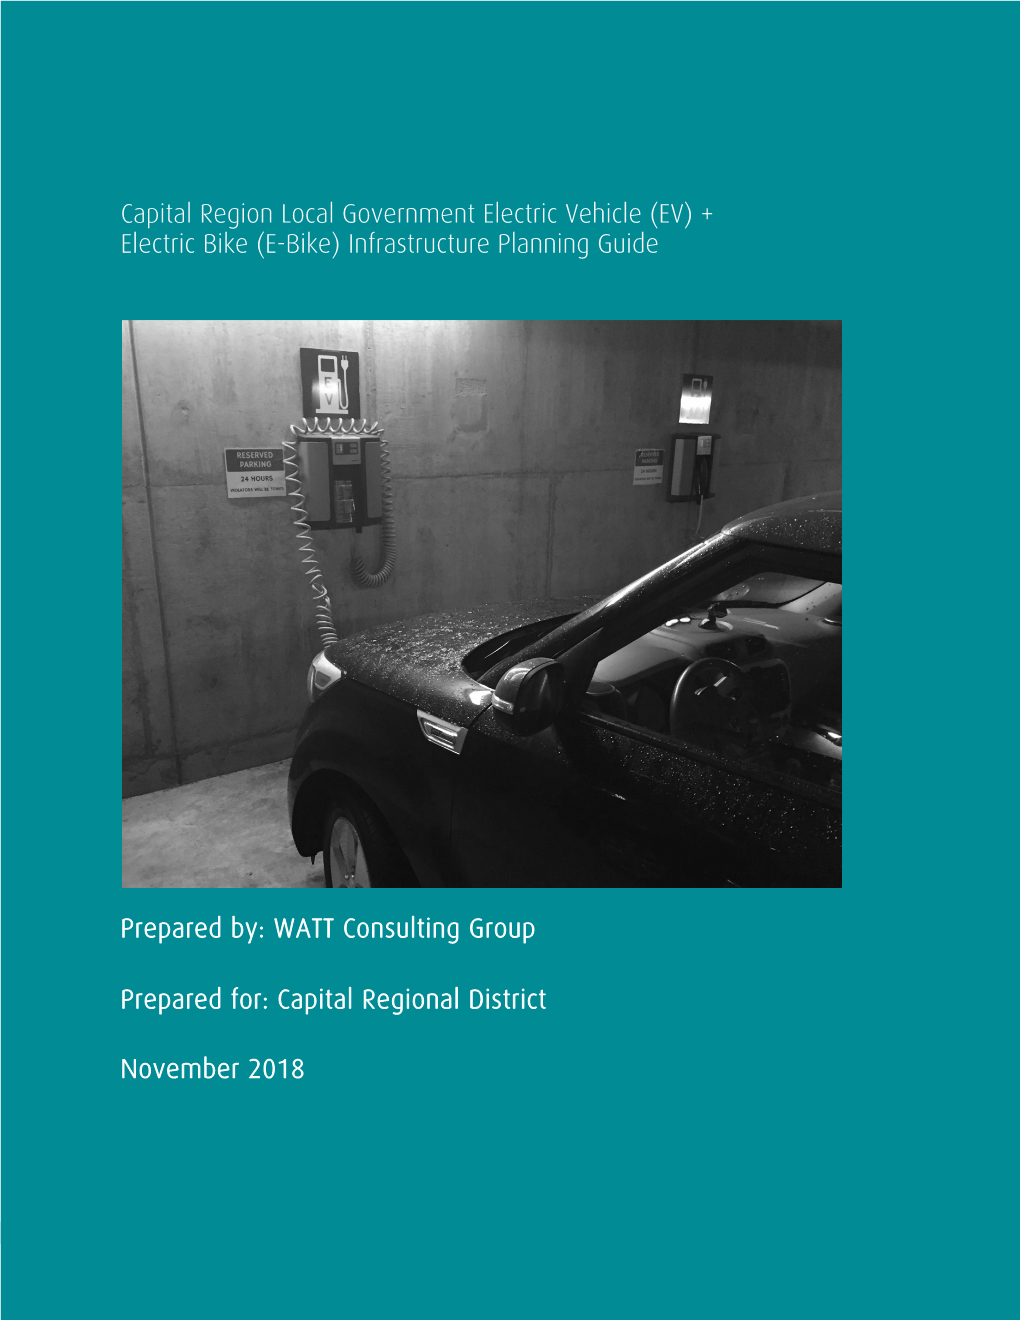 Capital Region Local Government Electric Vehicle (EV) + Electric Bike (E-Bike) Infrastructure Planning Guide